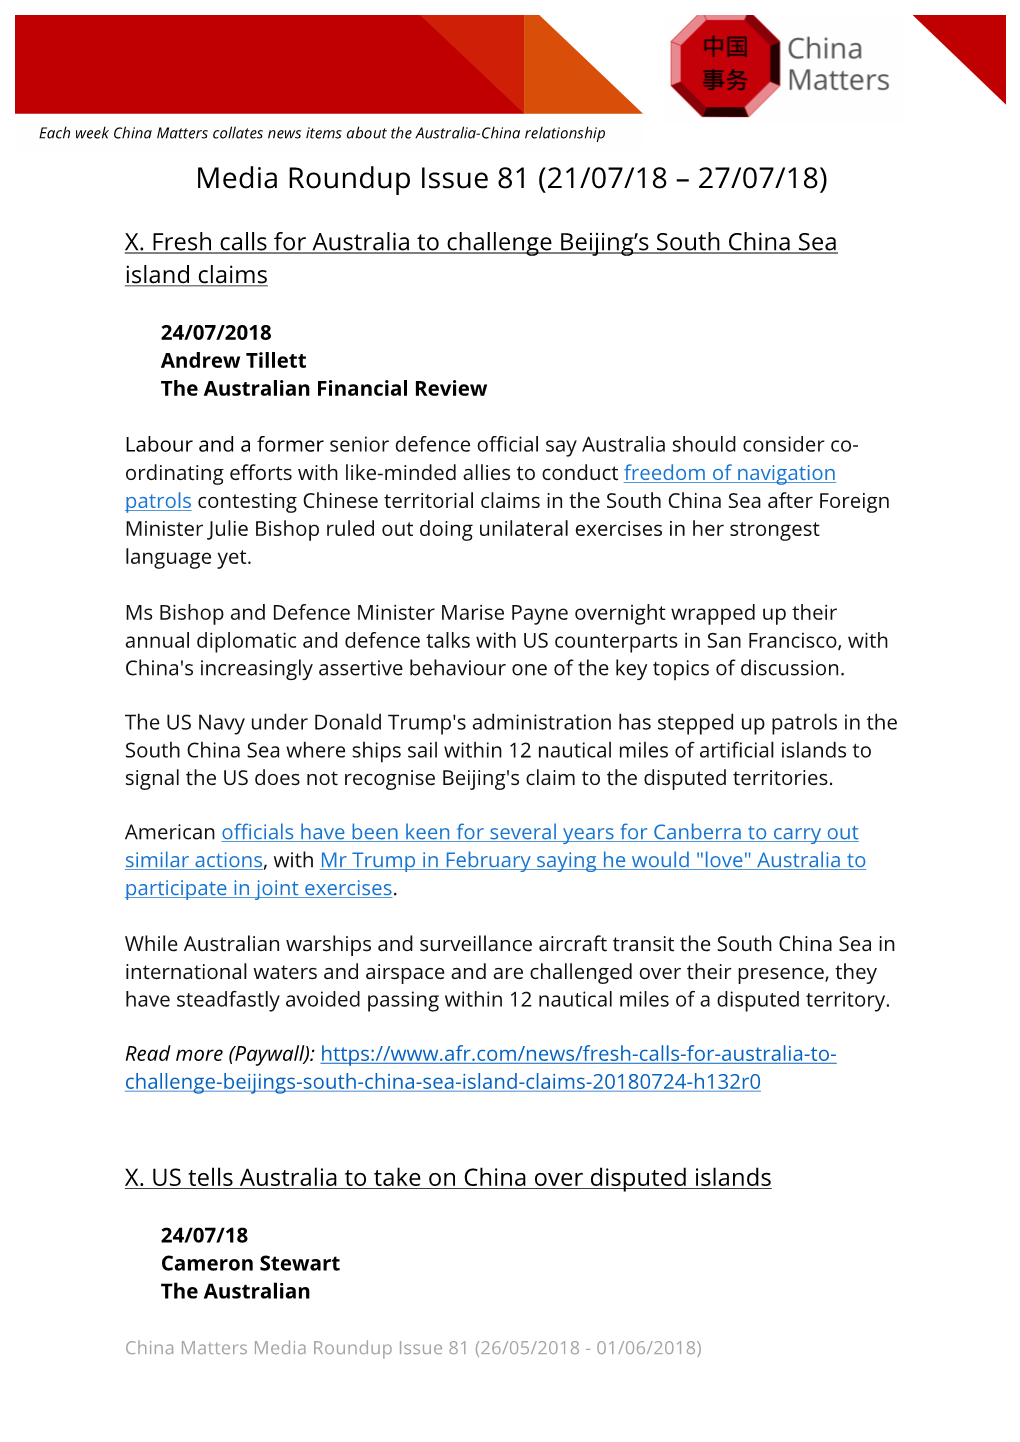 Official Aus-China Media Roundup Issue 81